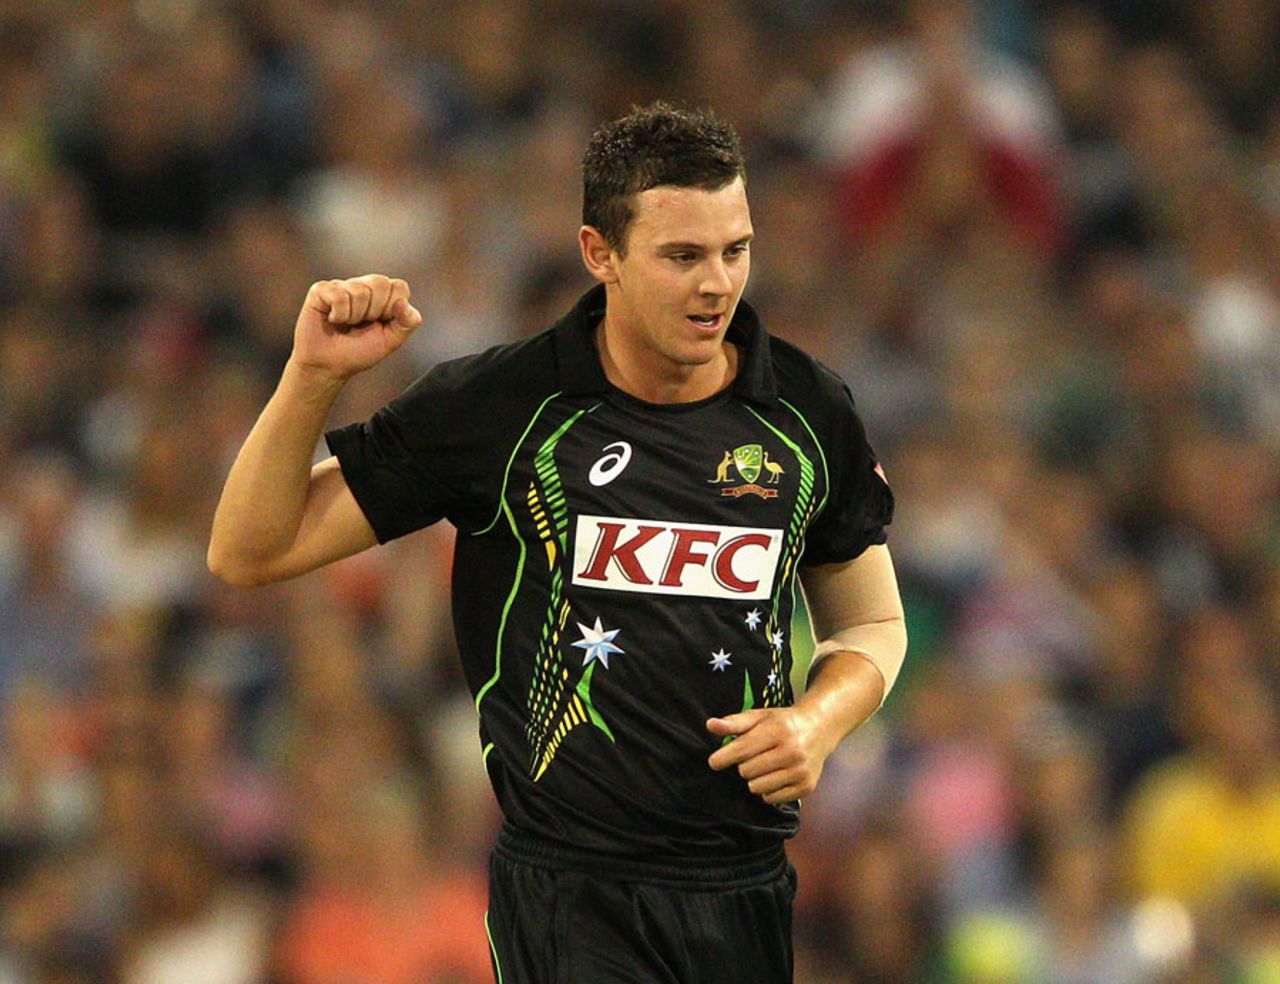 Josh Hazlewood collected his best T20 figures of 4 for 30, Australia v England, 2nd T20, Melbourne, January 31, 2014